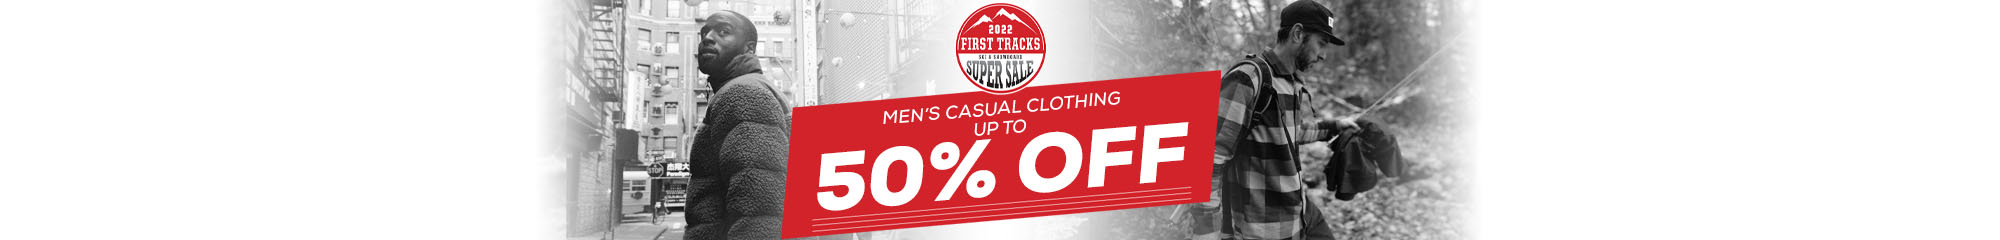 Deals on Men's Casual Clothing